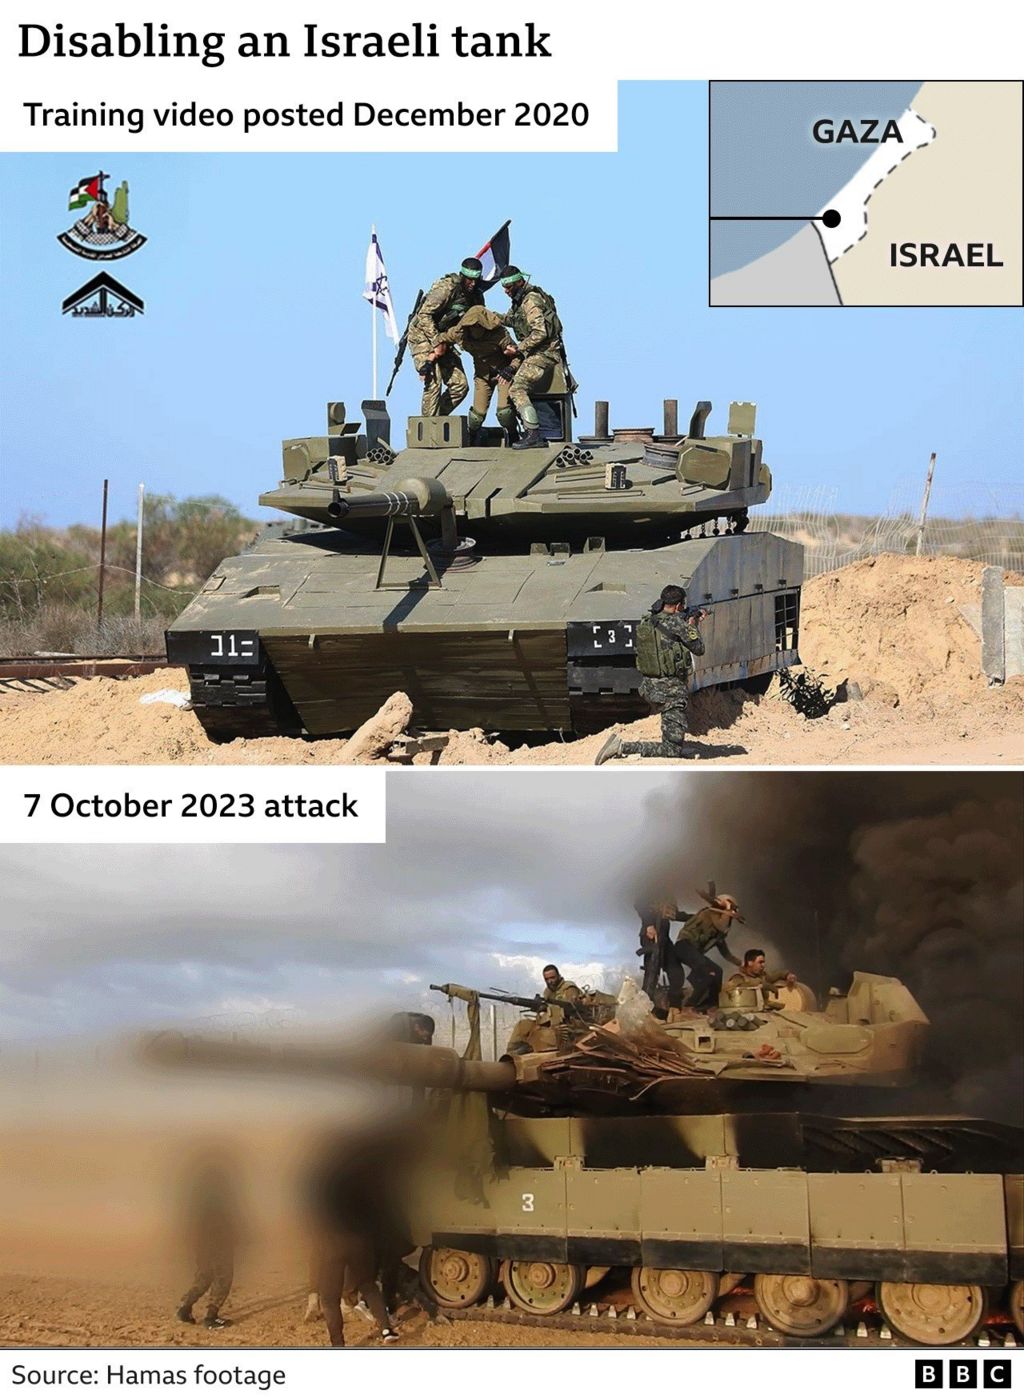 Stills from Hamas video on how to disable an Israeli tank